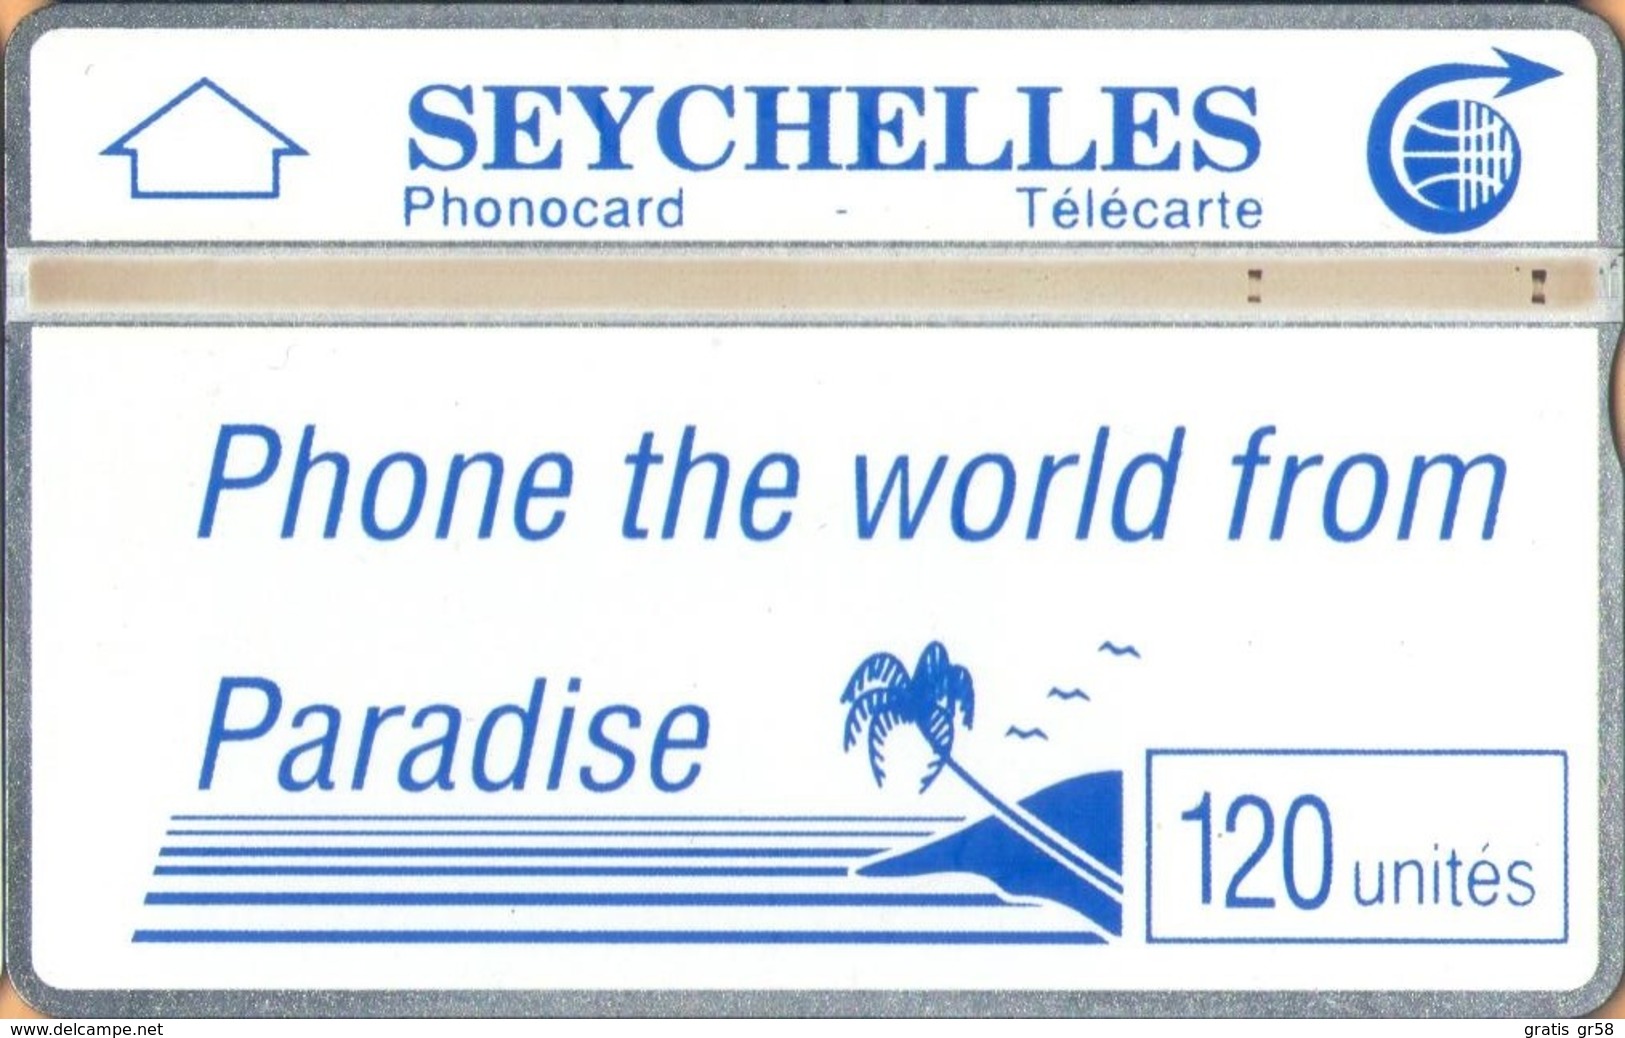 Seychelles - L&G, SEY-12, Phone The World From Paradise (Blue Palm & Slogan), 105H, 4,000ex, 5/91, Used As Scan - Sychelles